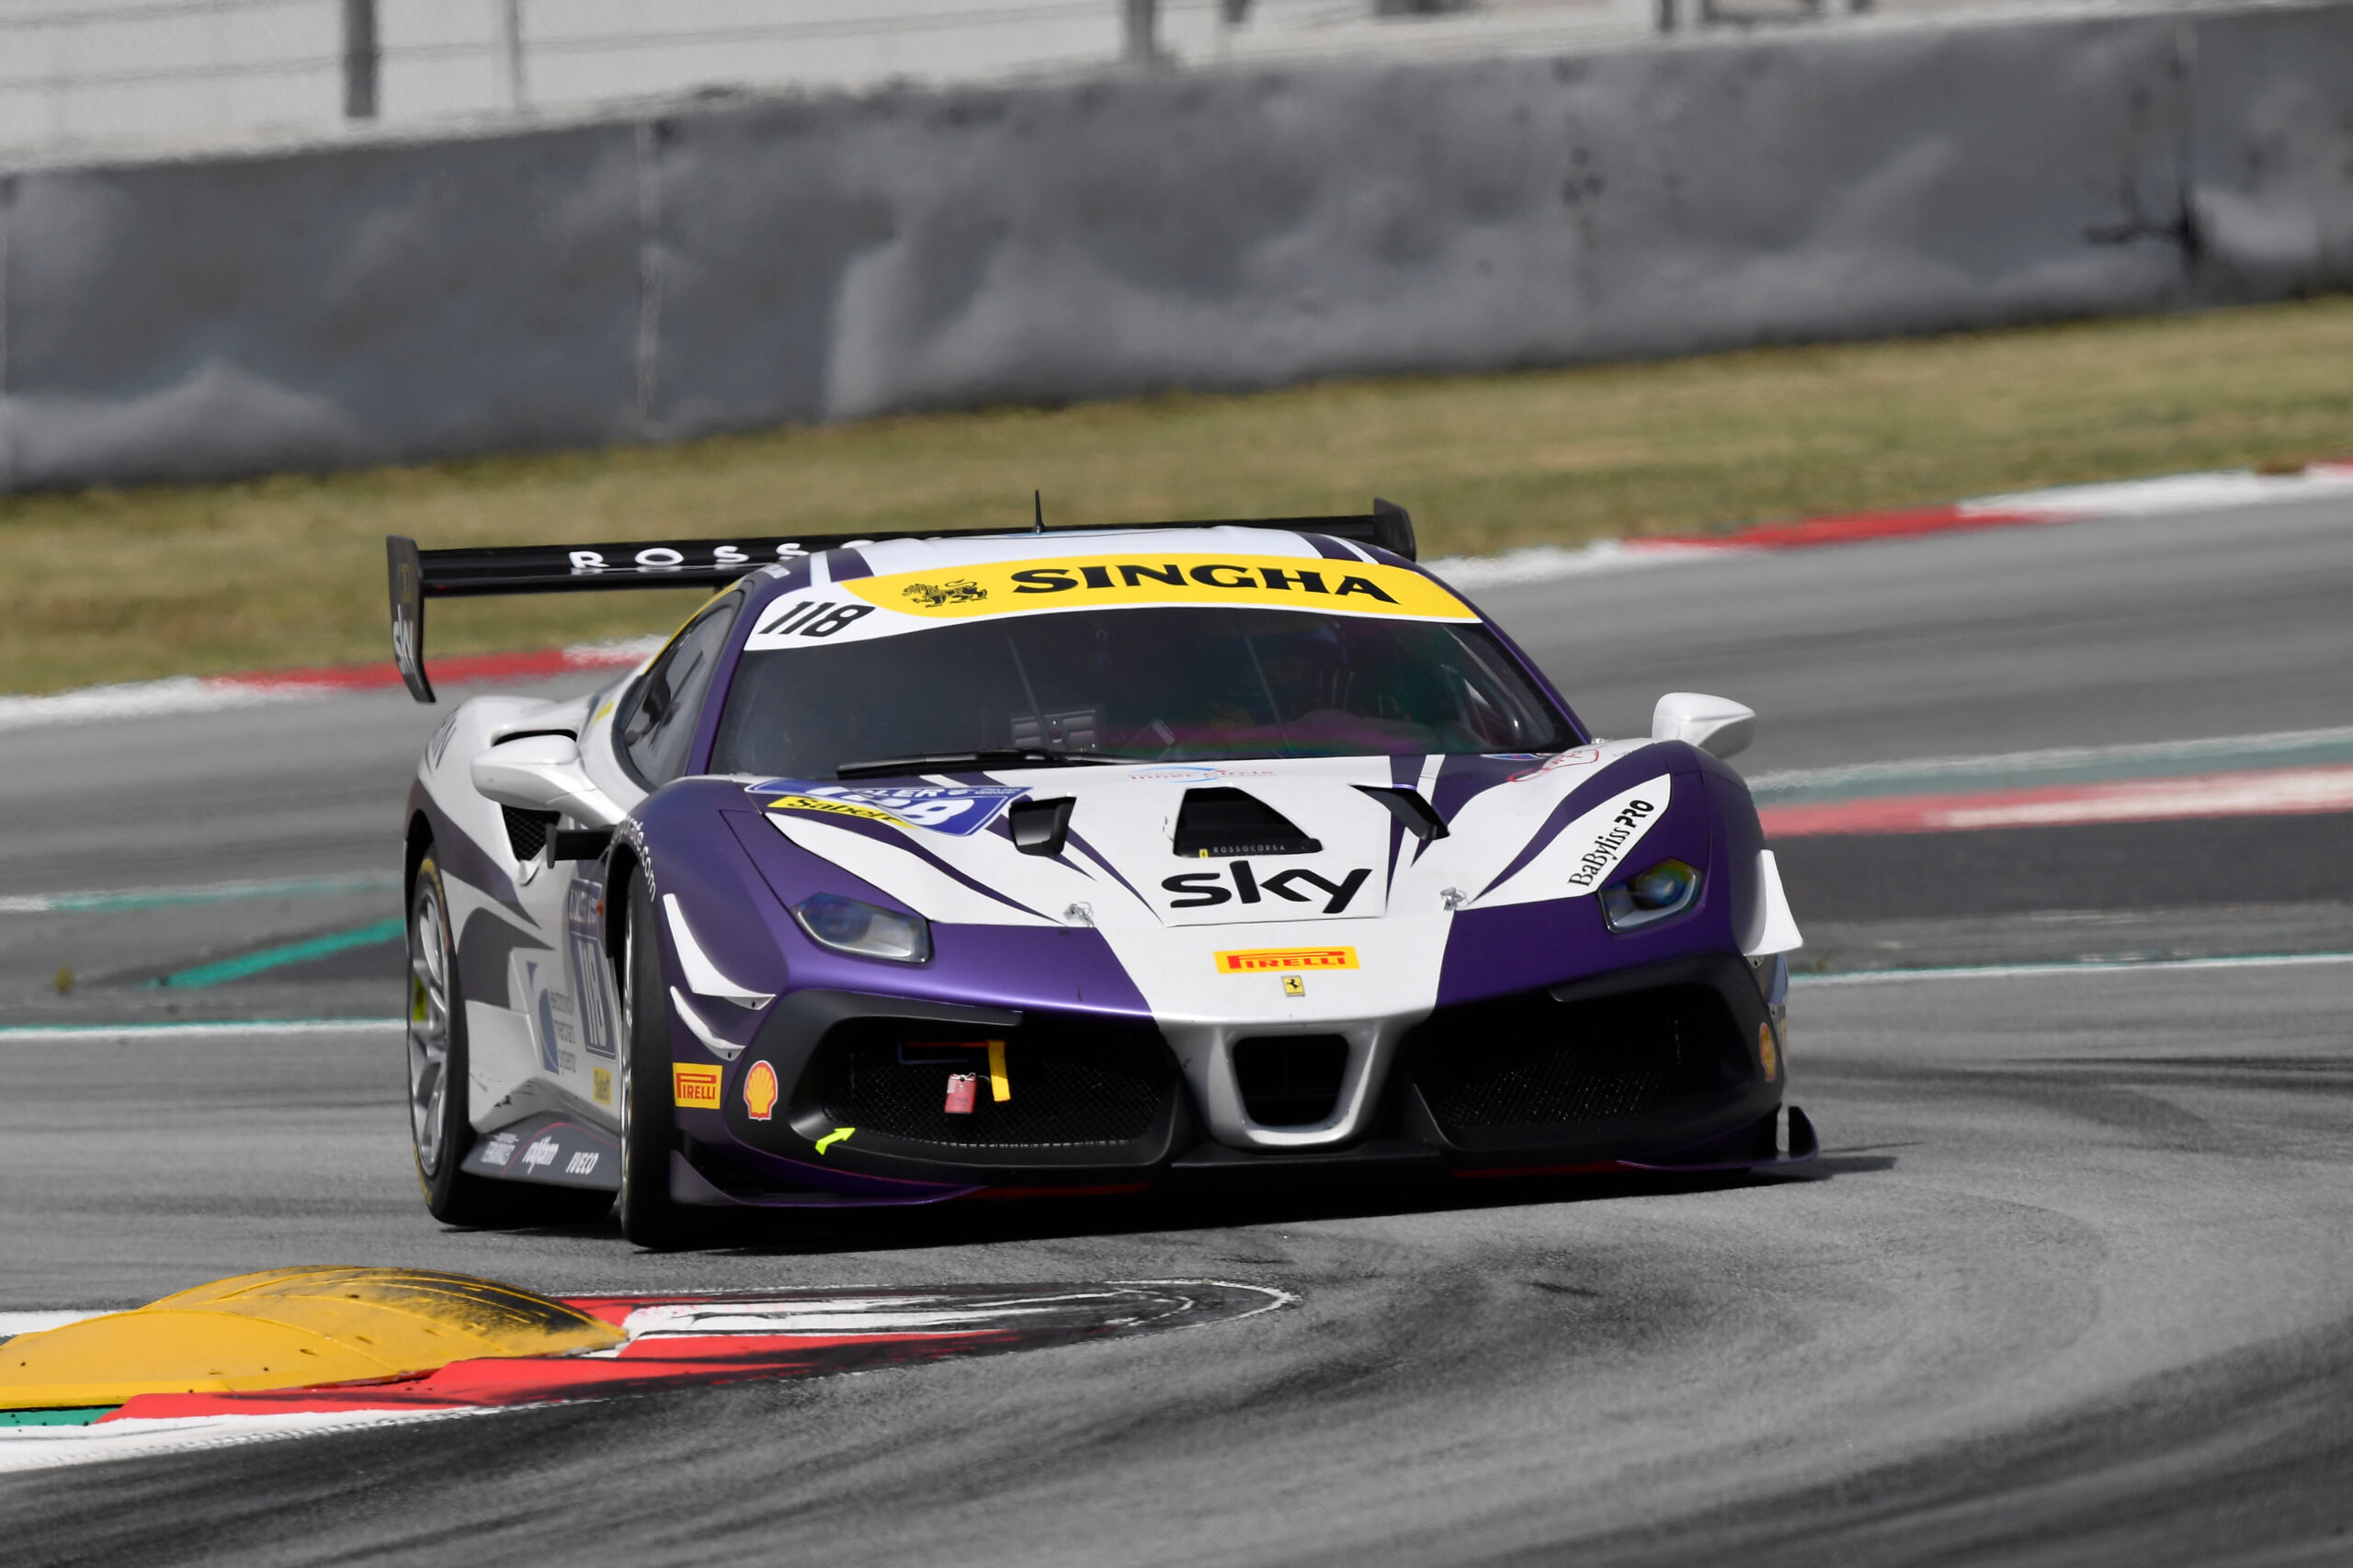 Electronic Merchant Systems Race Team Driver James Weiland finishing P1 in Barcelona Ferrari Challenge